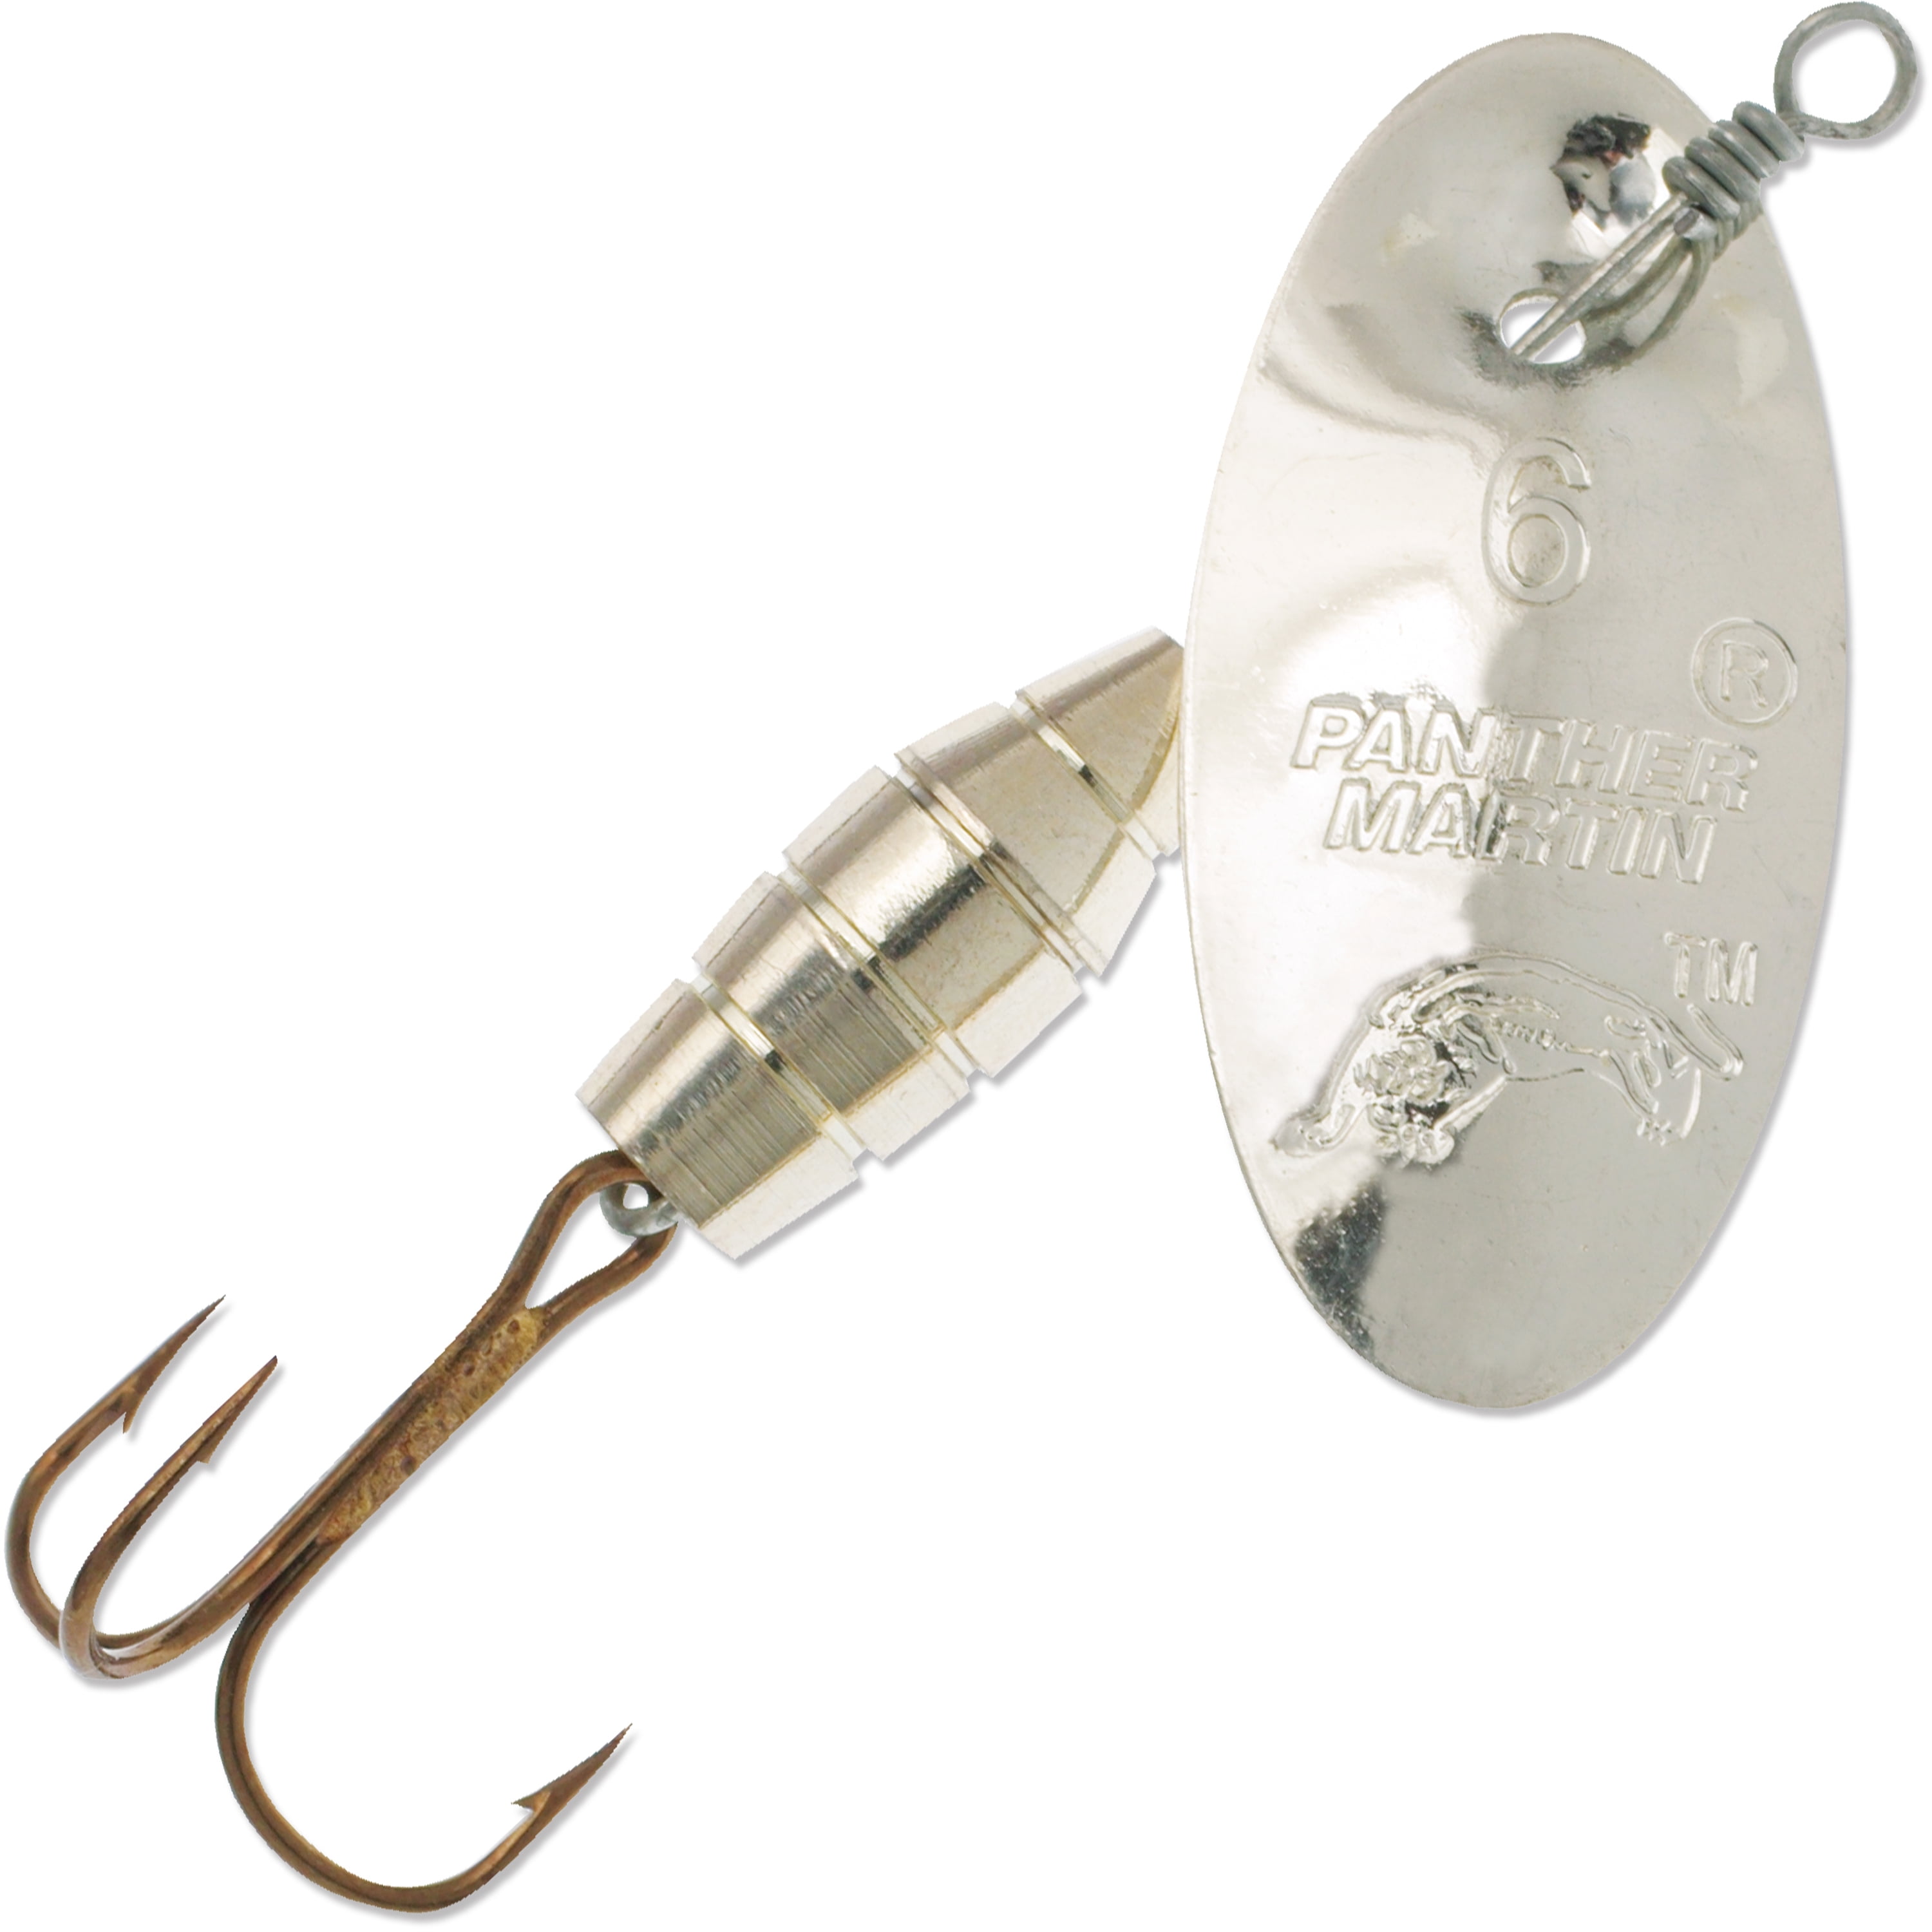 Panther Martin PMD_6_S Deluxe Barrel Body Spinners Fishing Lure - Silver -  6 (1/4 oz)